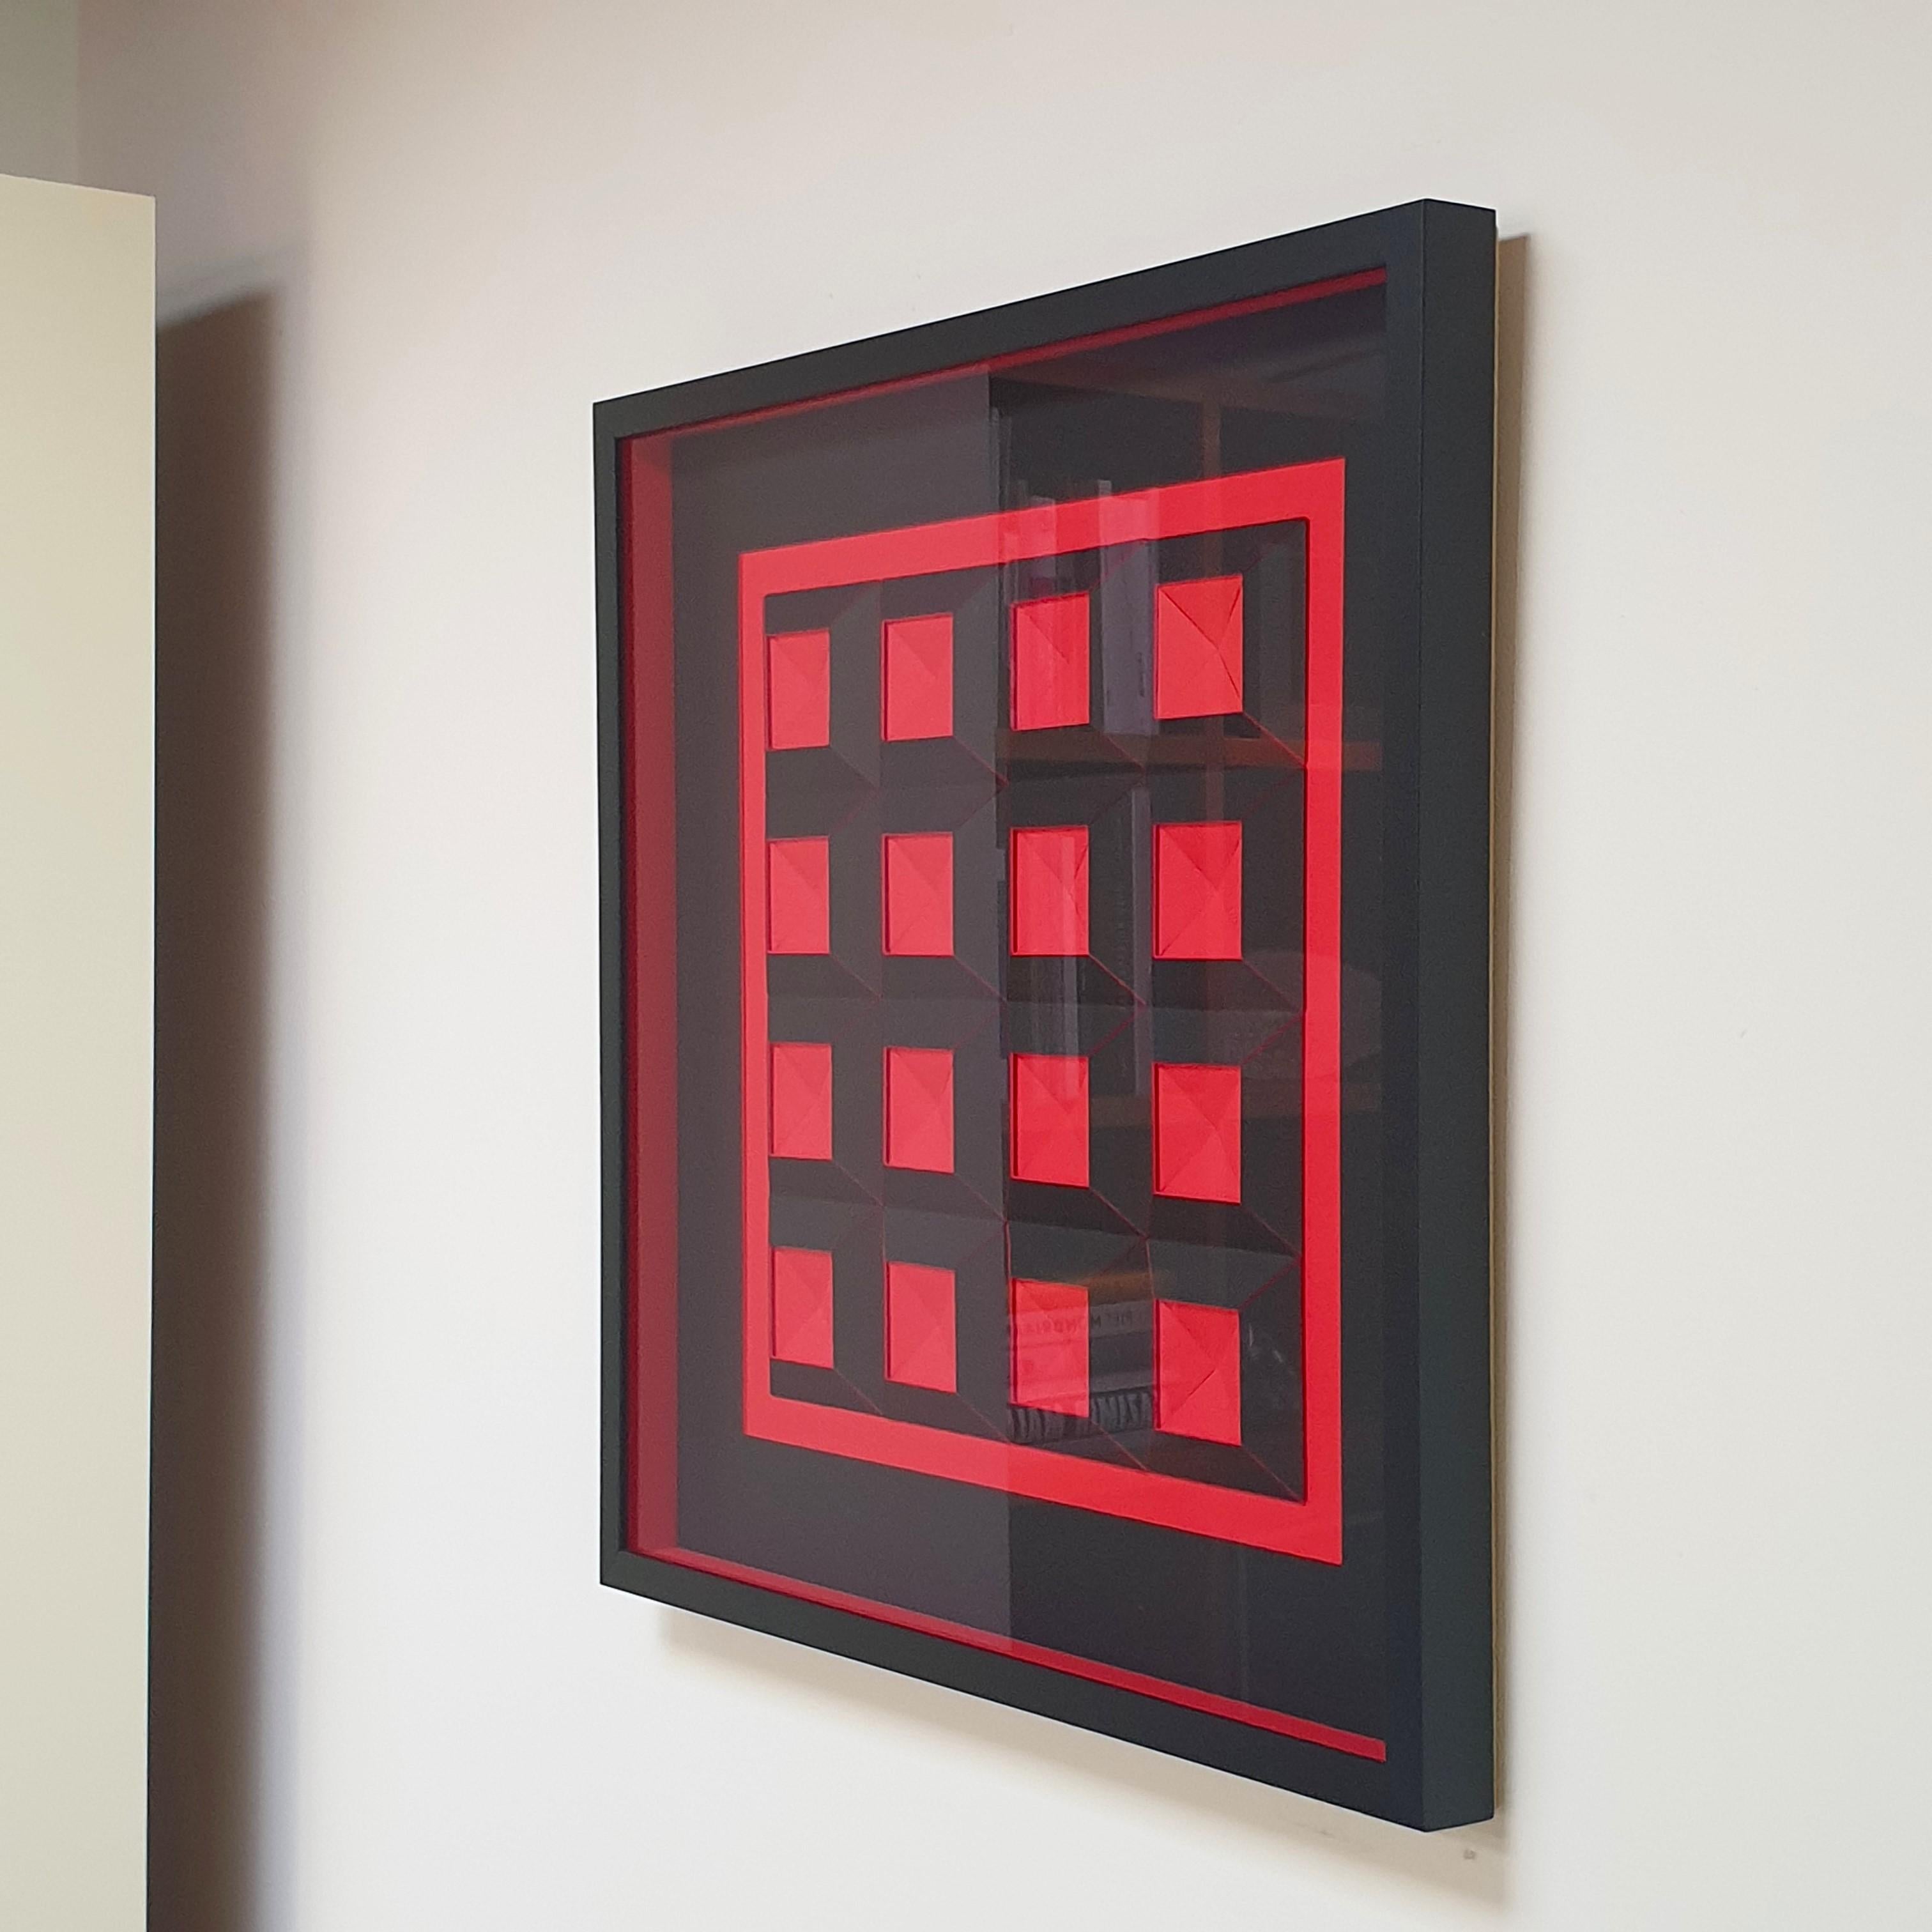 16 red/black quadrants RZ is a unique one-of-a-kind contemporary modern painting relief by Dutch artist Eef de Graaf. The relief is made from meticulously hand-cut plain black and red cardboard elements that are hand-mounted together forming sixteen